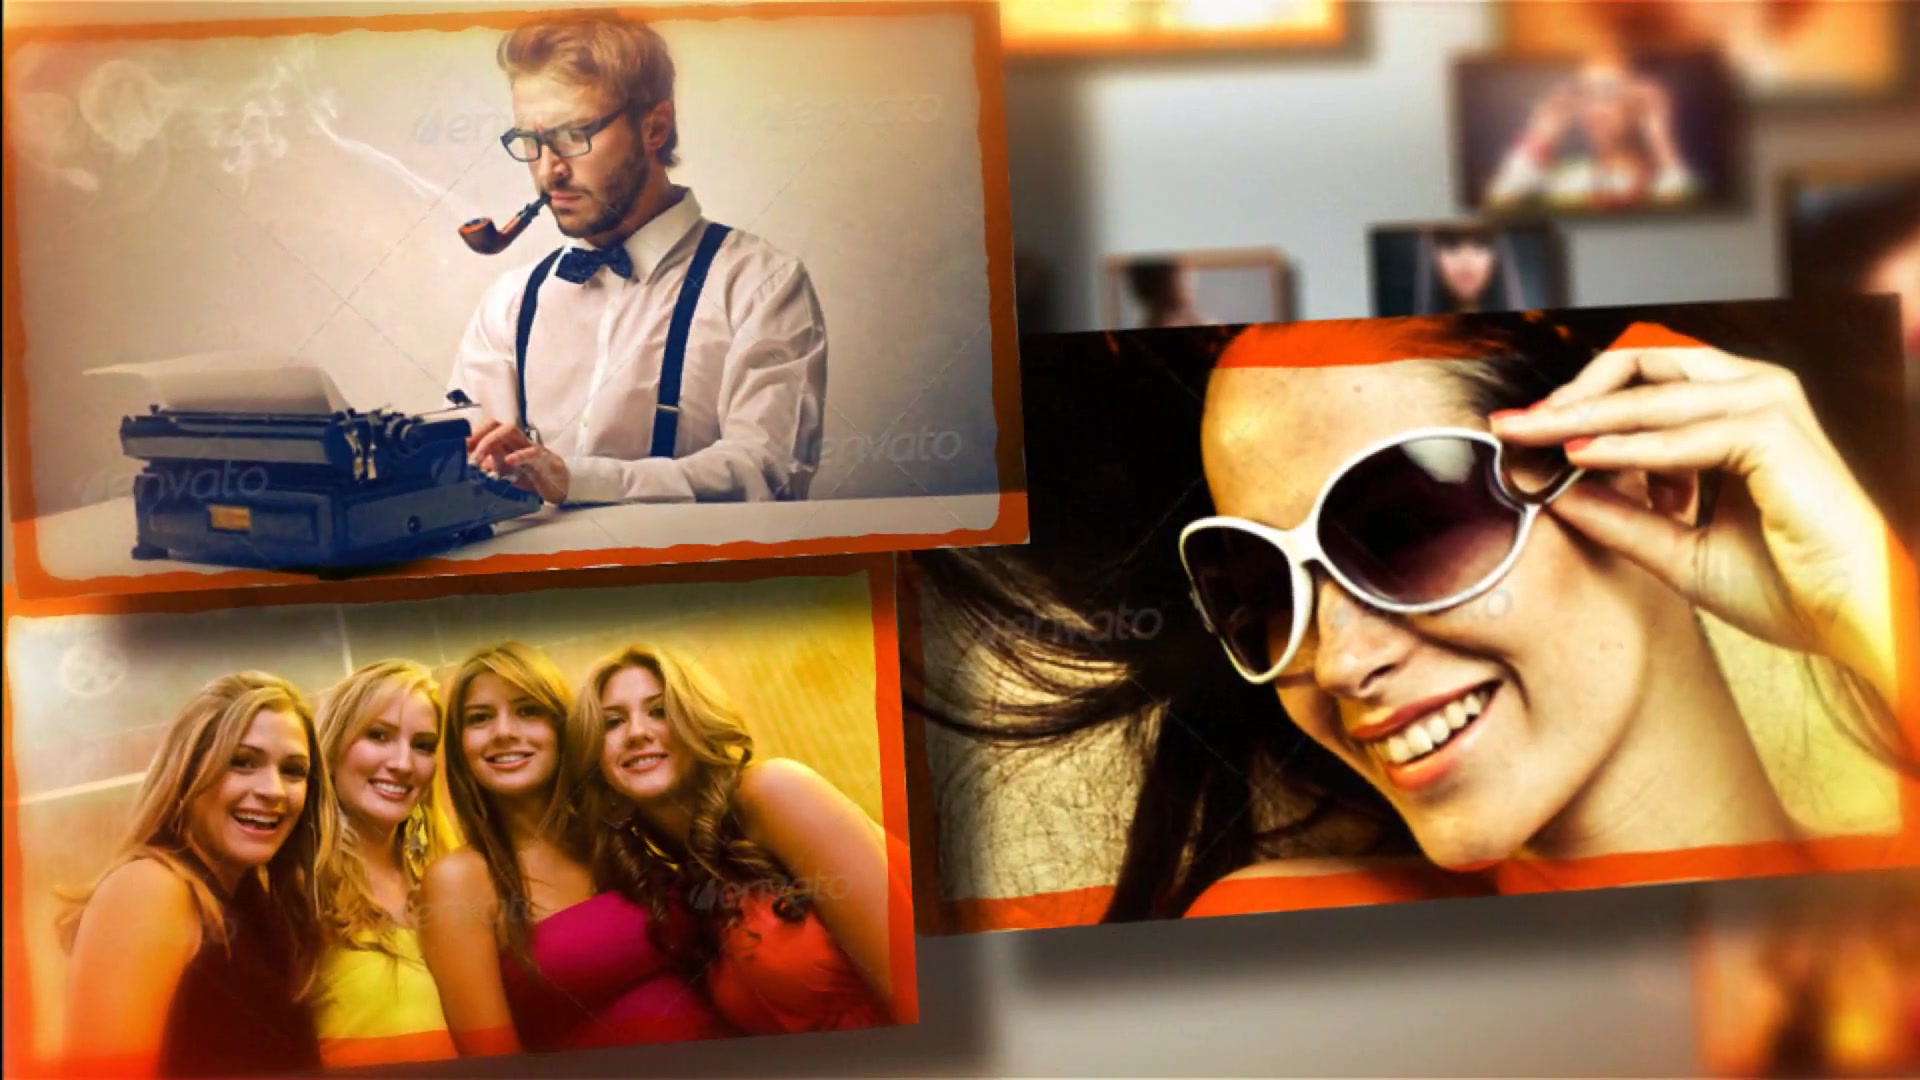 New Show v.2 - Download Videohive 9853770